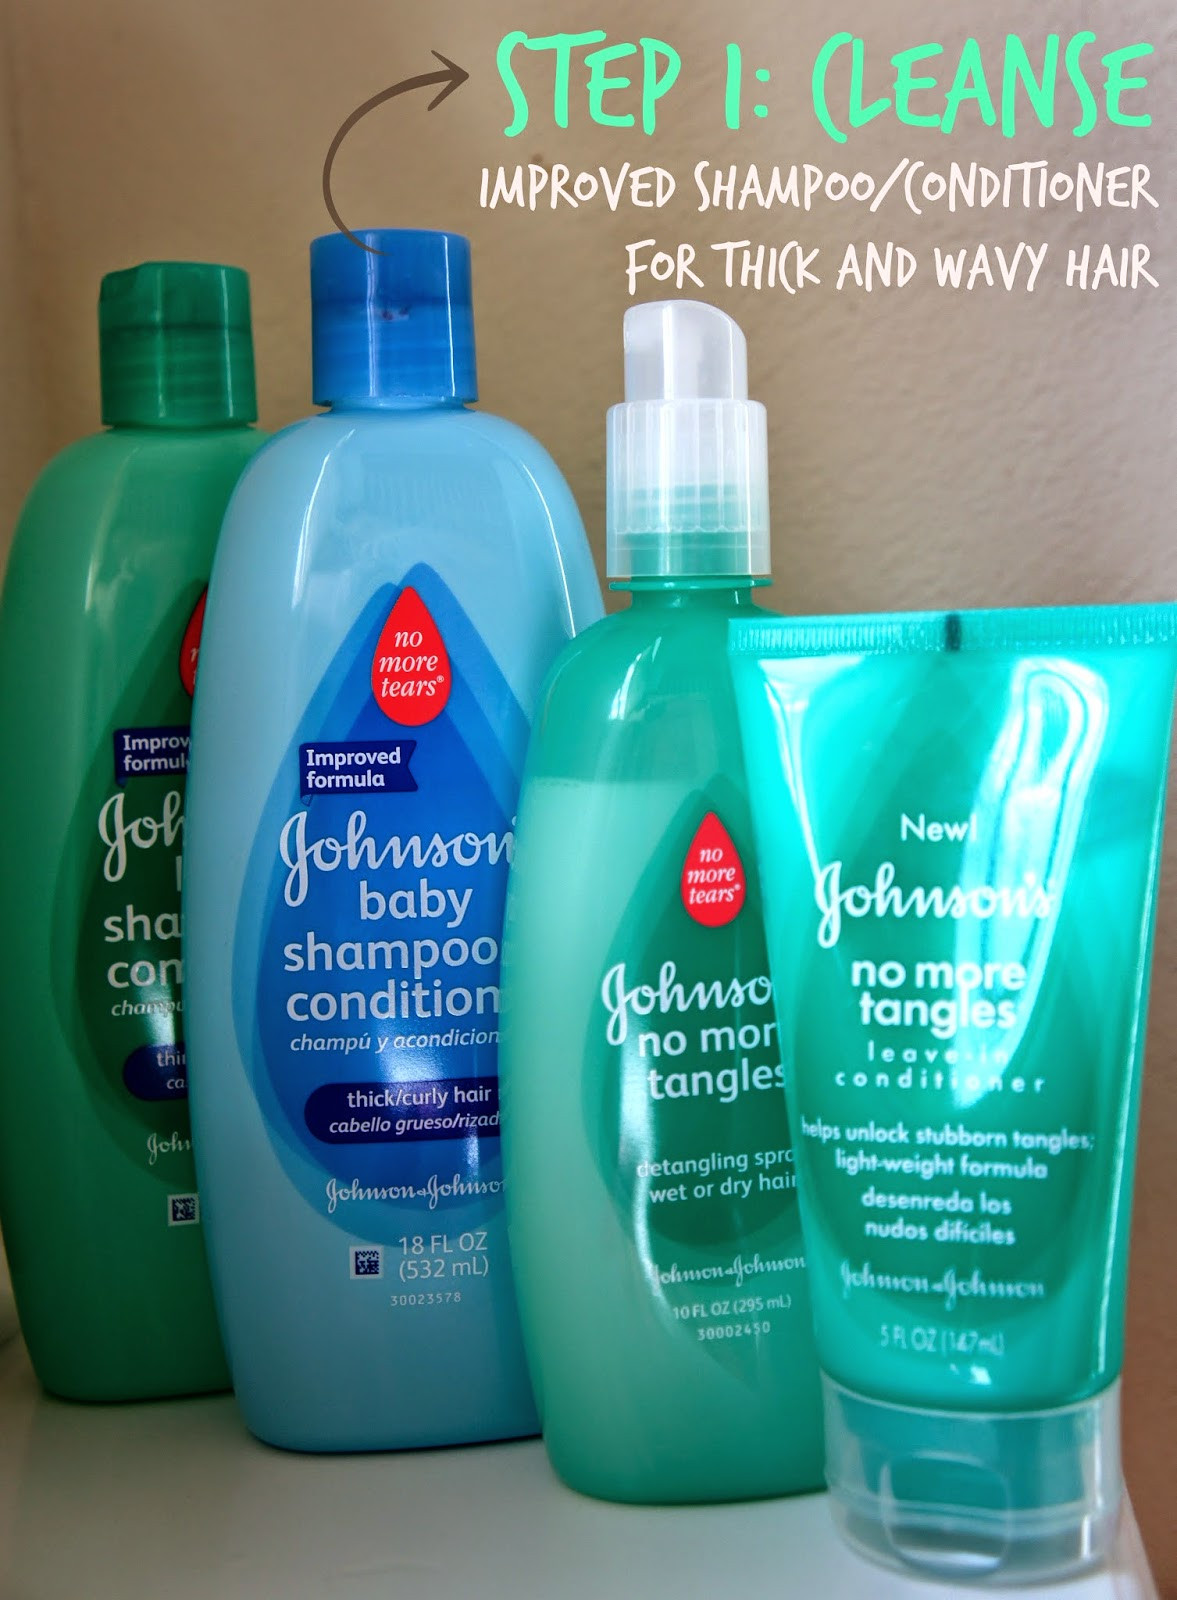 Baby Shampoo For Curly Hair
 Making time for my girl with Johnson s 3 Step Regimen